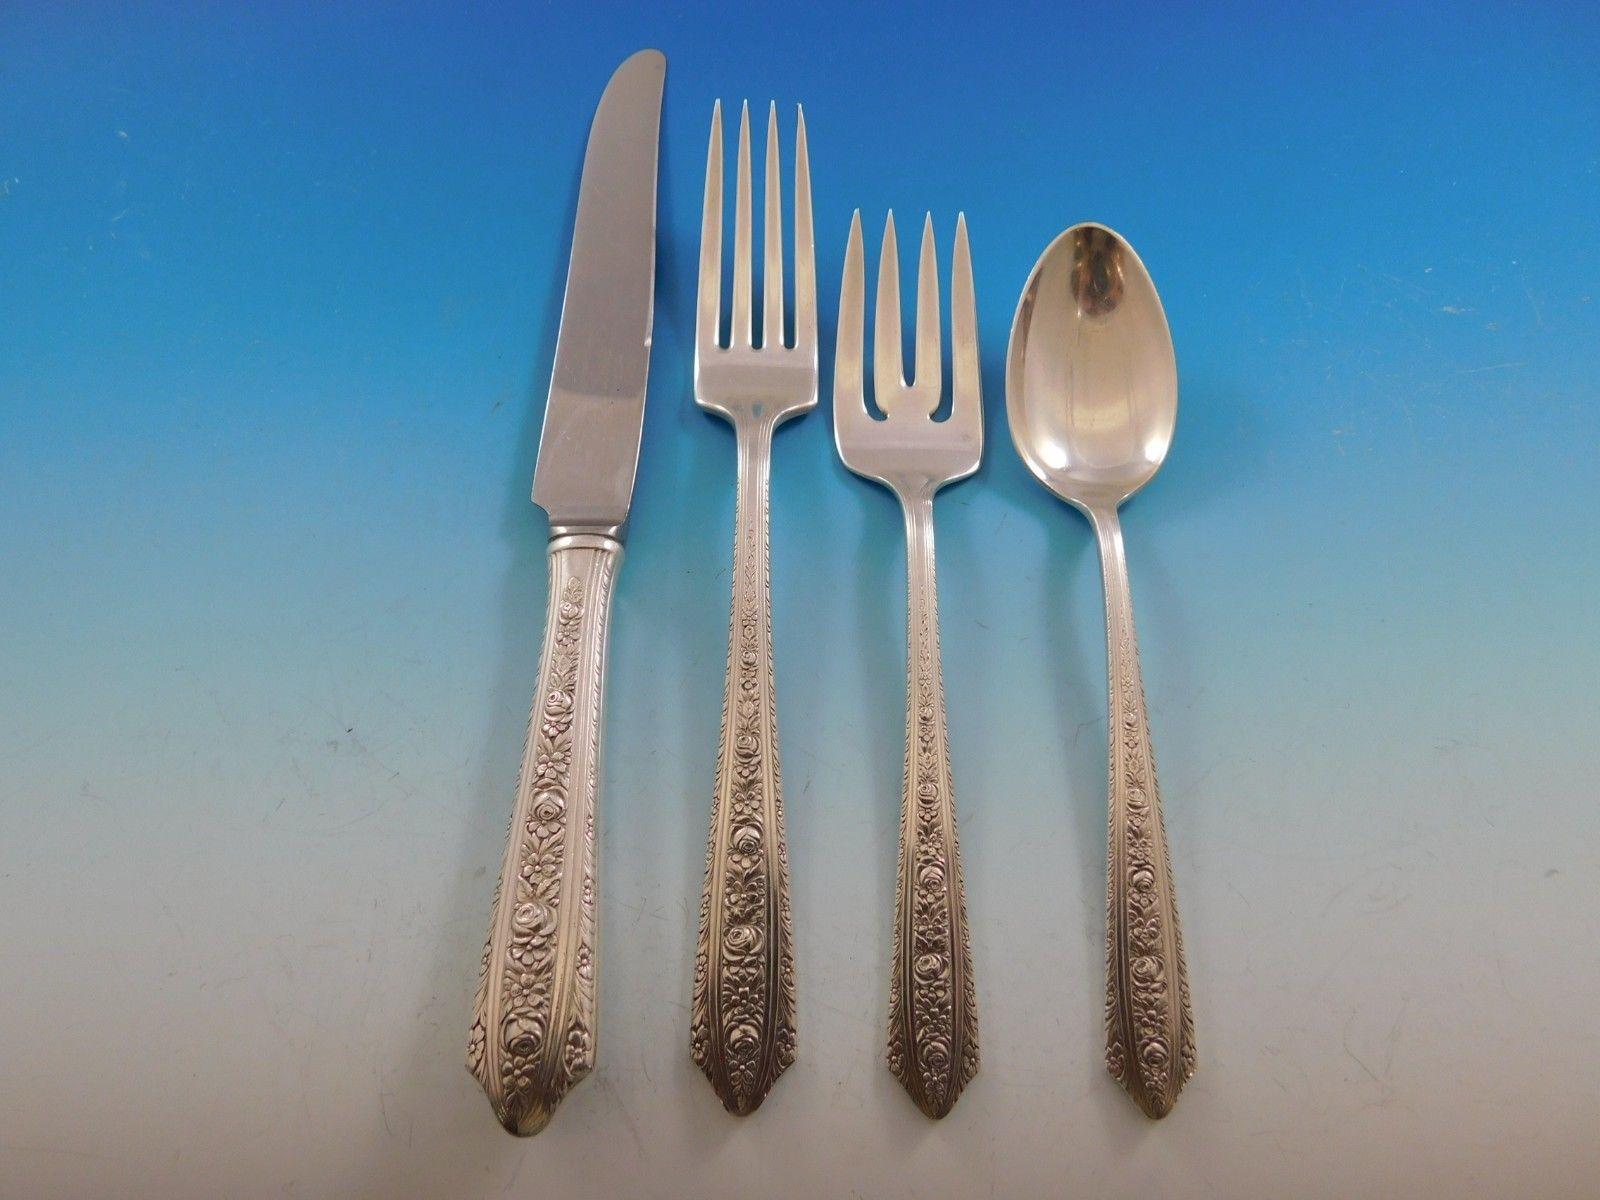 Beautifully designed Normandie by Wallace silver flatware set, 67 pieces. This set includes:

Eight knives, 8 3/4